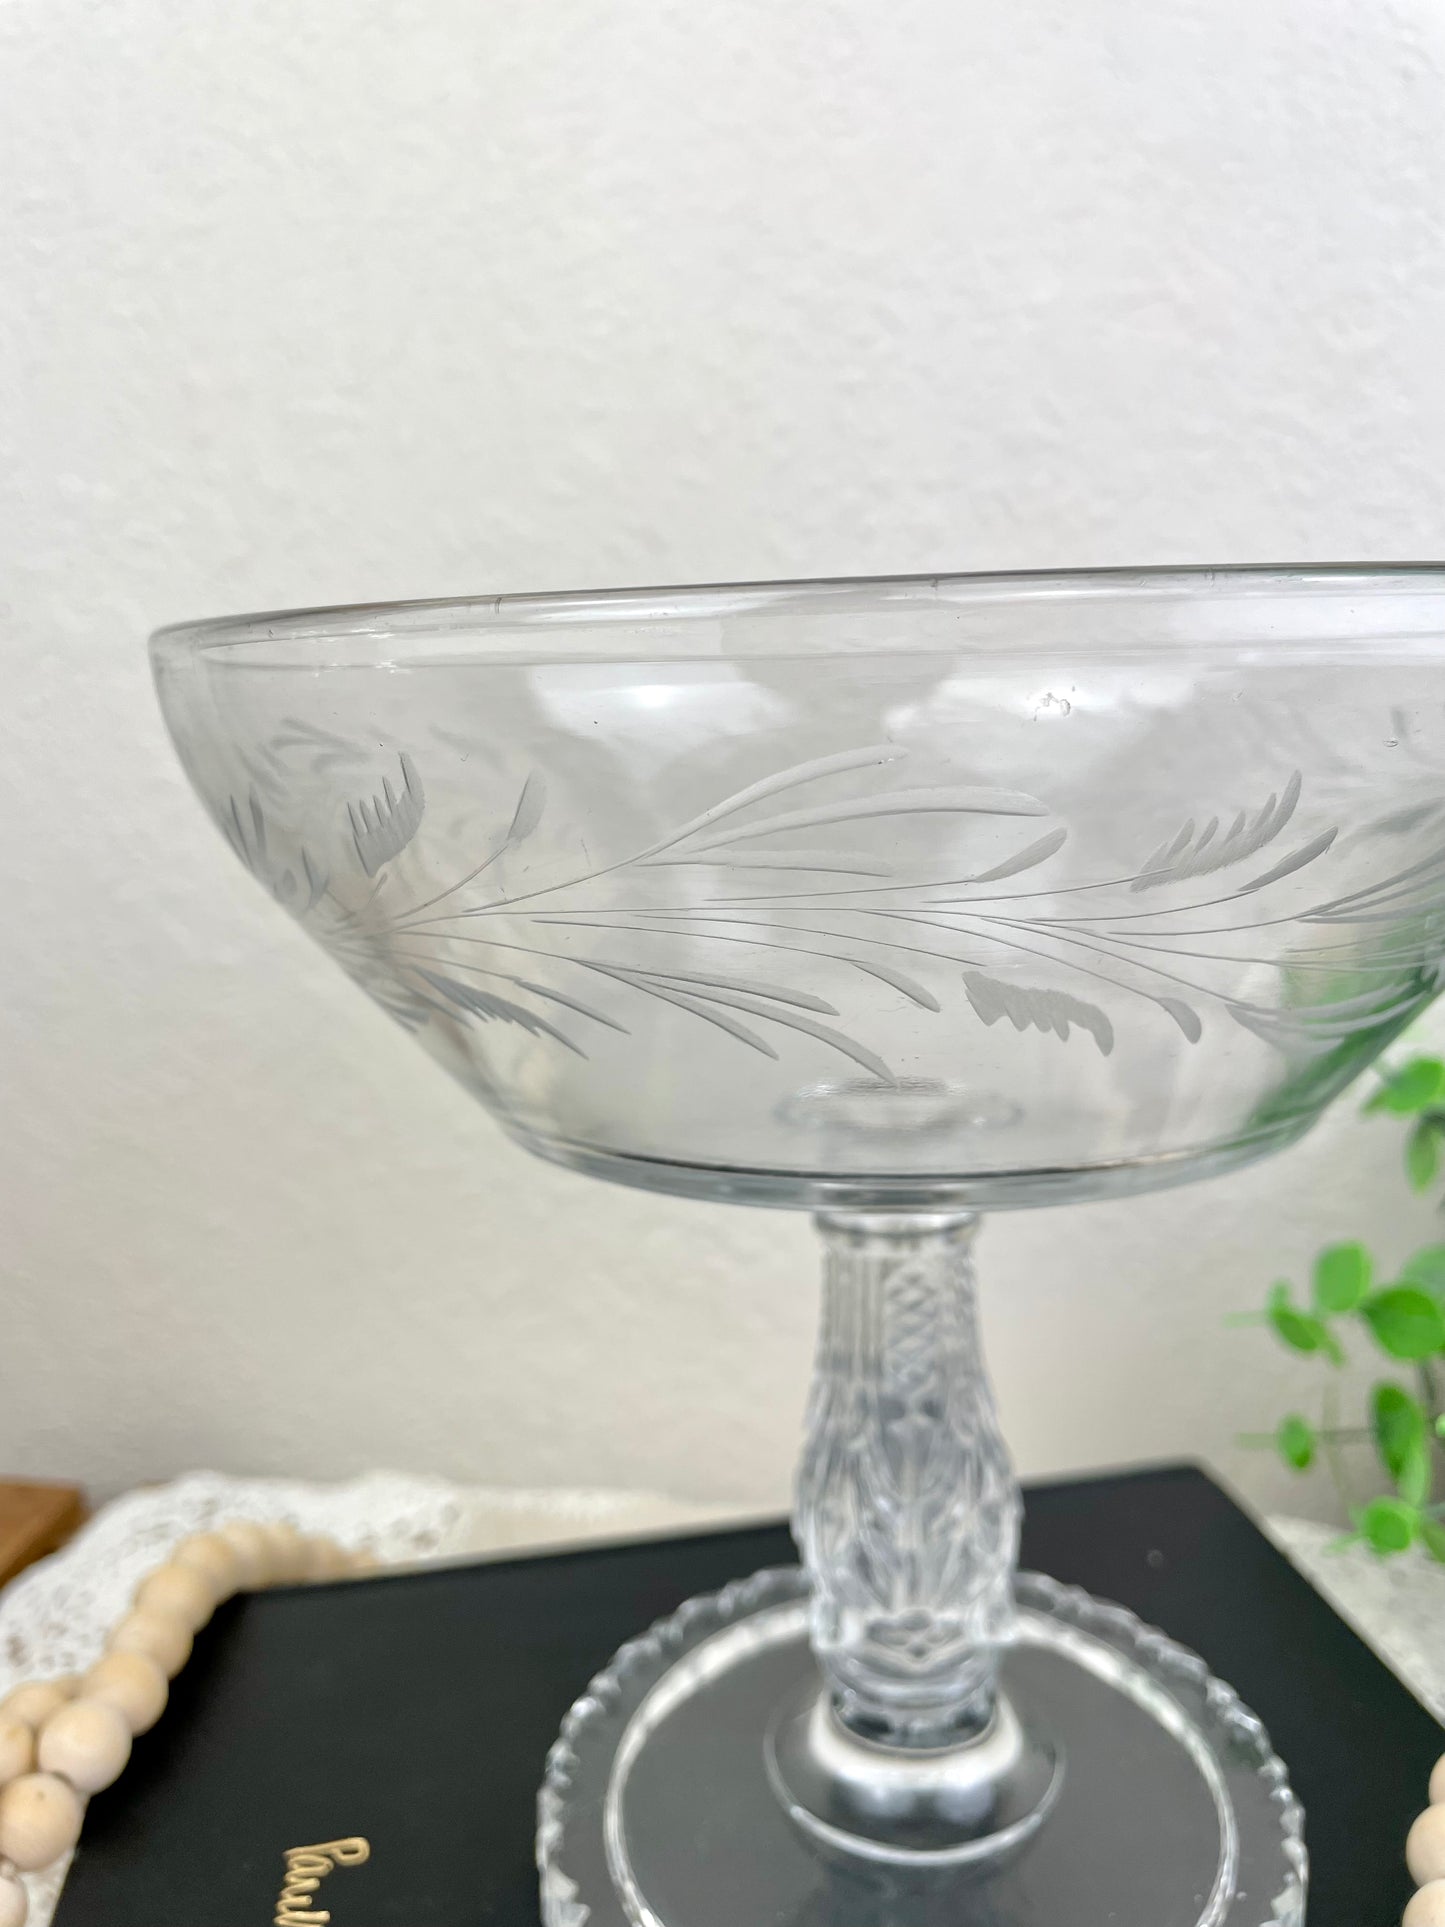 Vintage Pressed Glass Compote Dish with Etched Designs